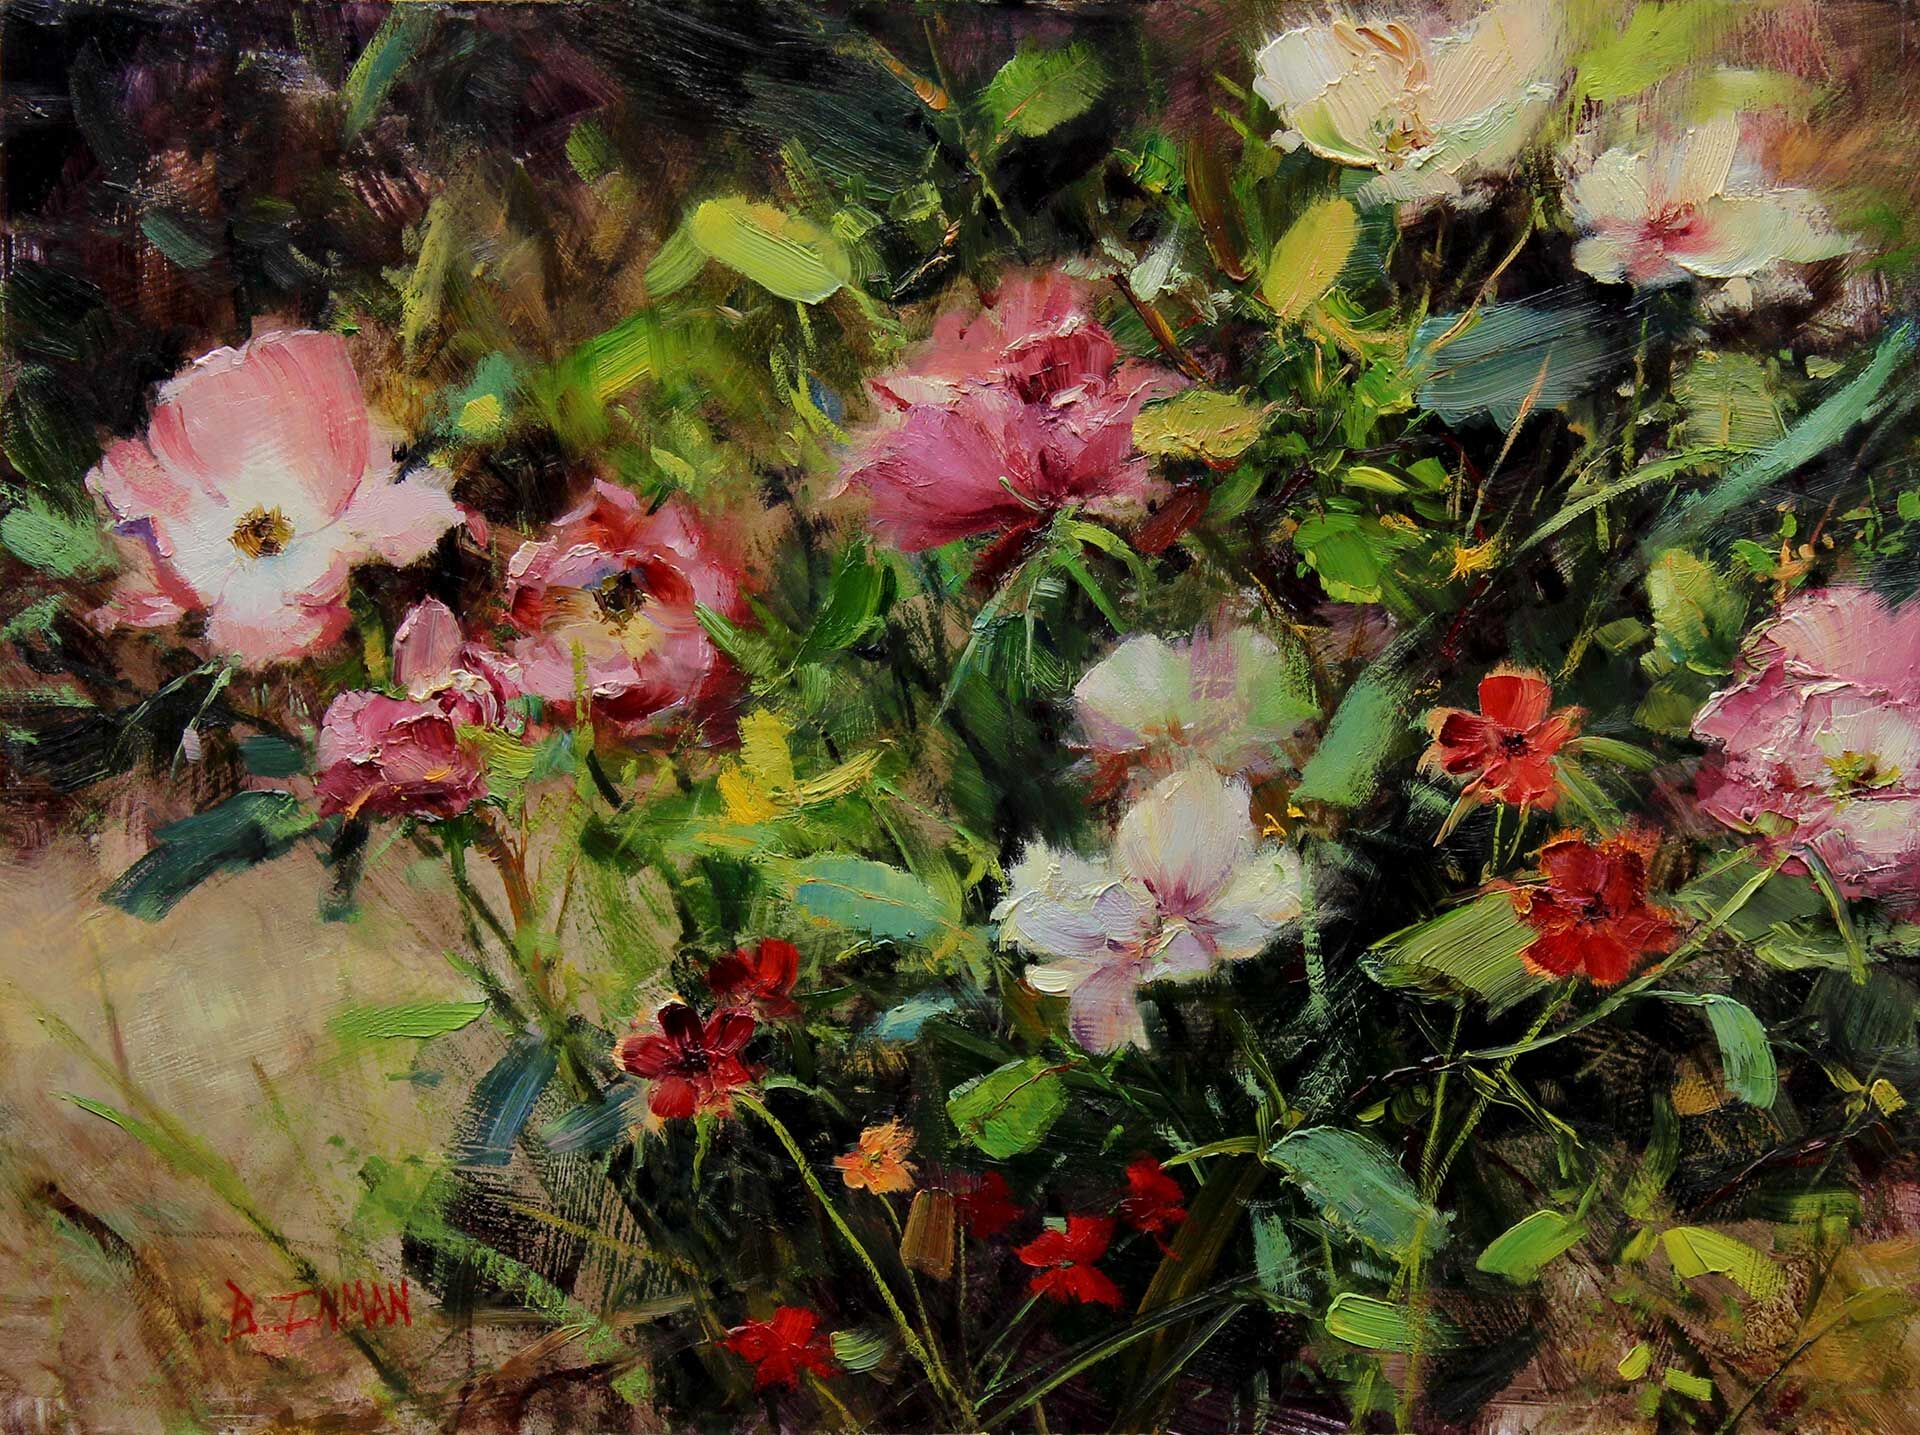 Wild flowers I painted plein air in Zion, Indiana during the Sulivan Munce outdoor painting event. It took home the Best of Show...